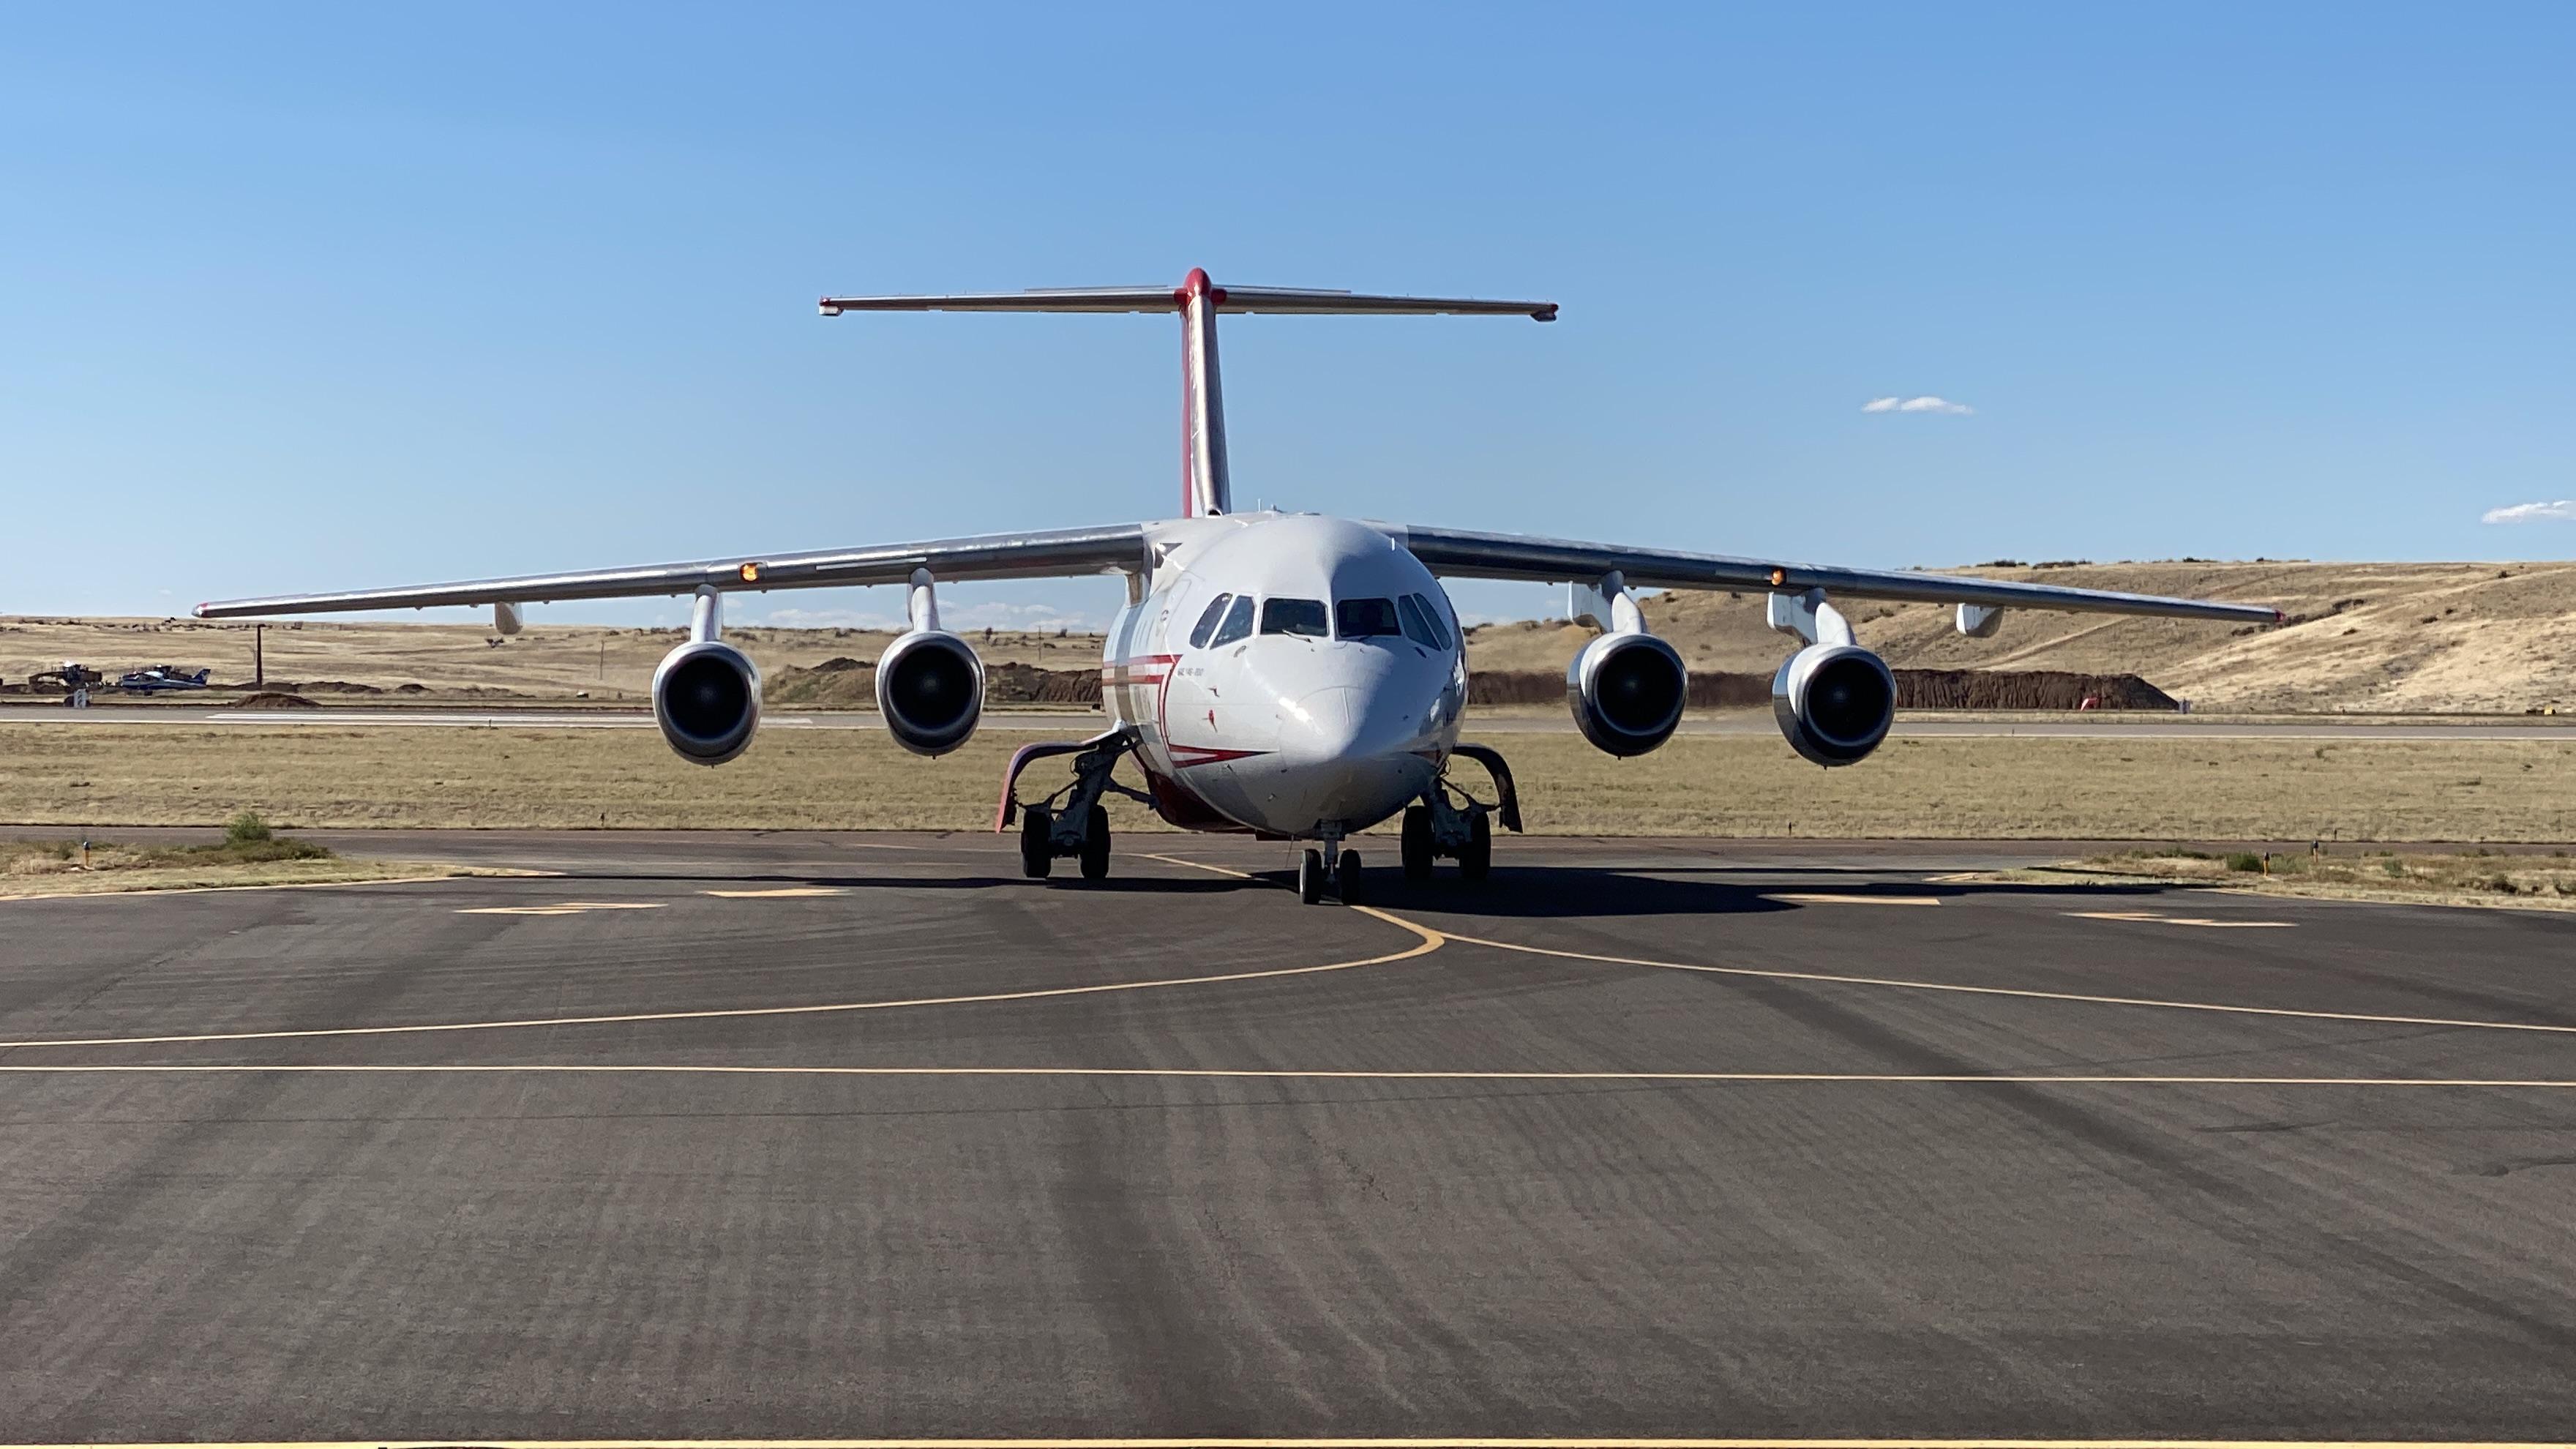 Air tanker used for dropping retardant parked at airport